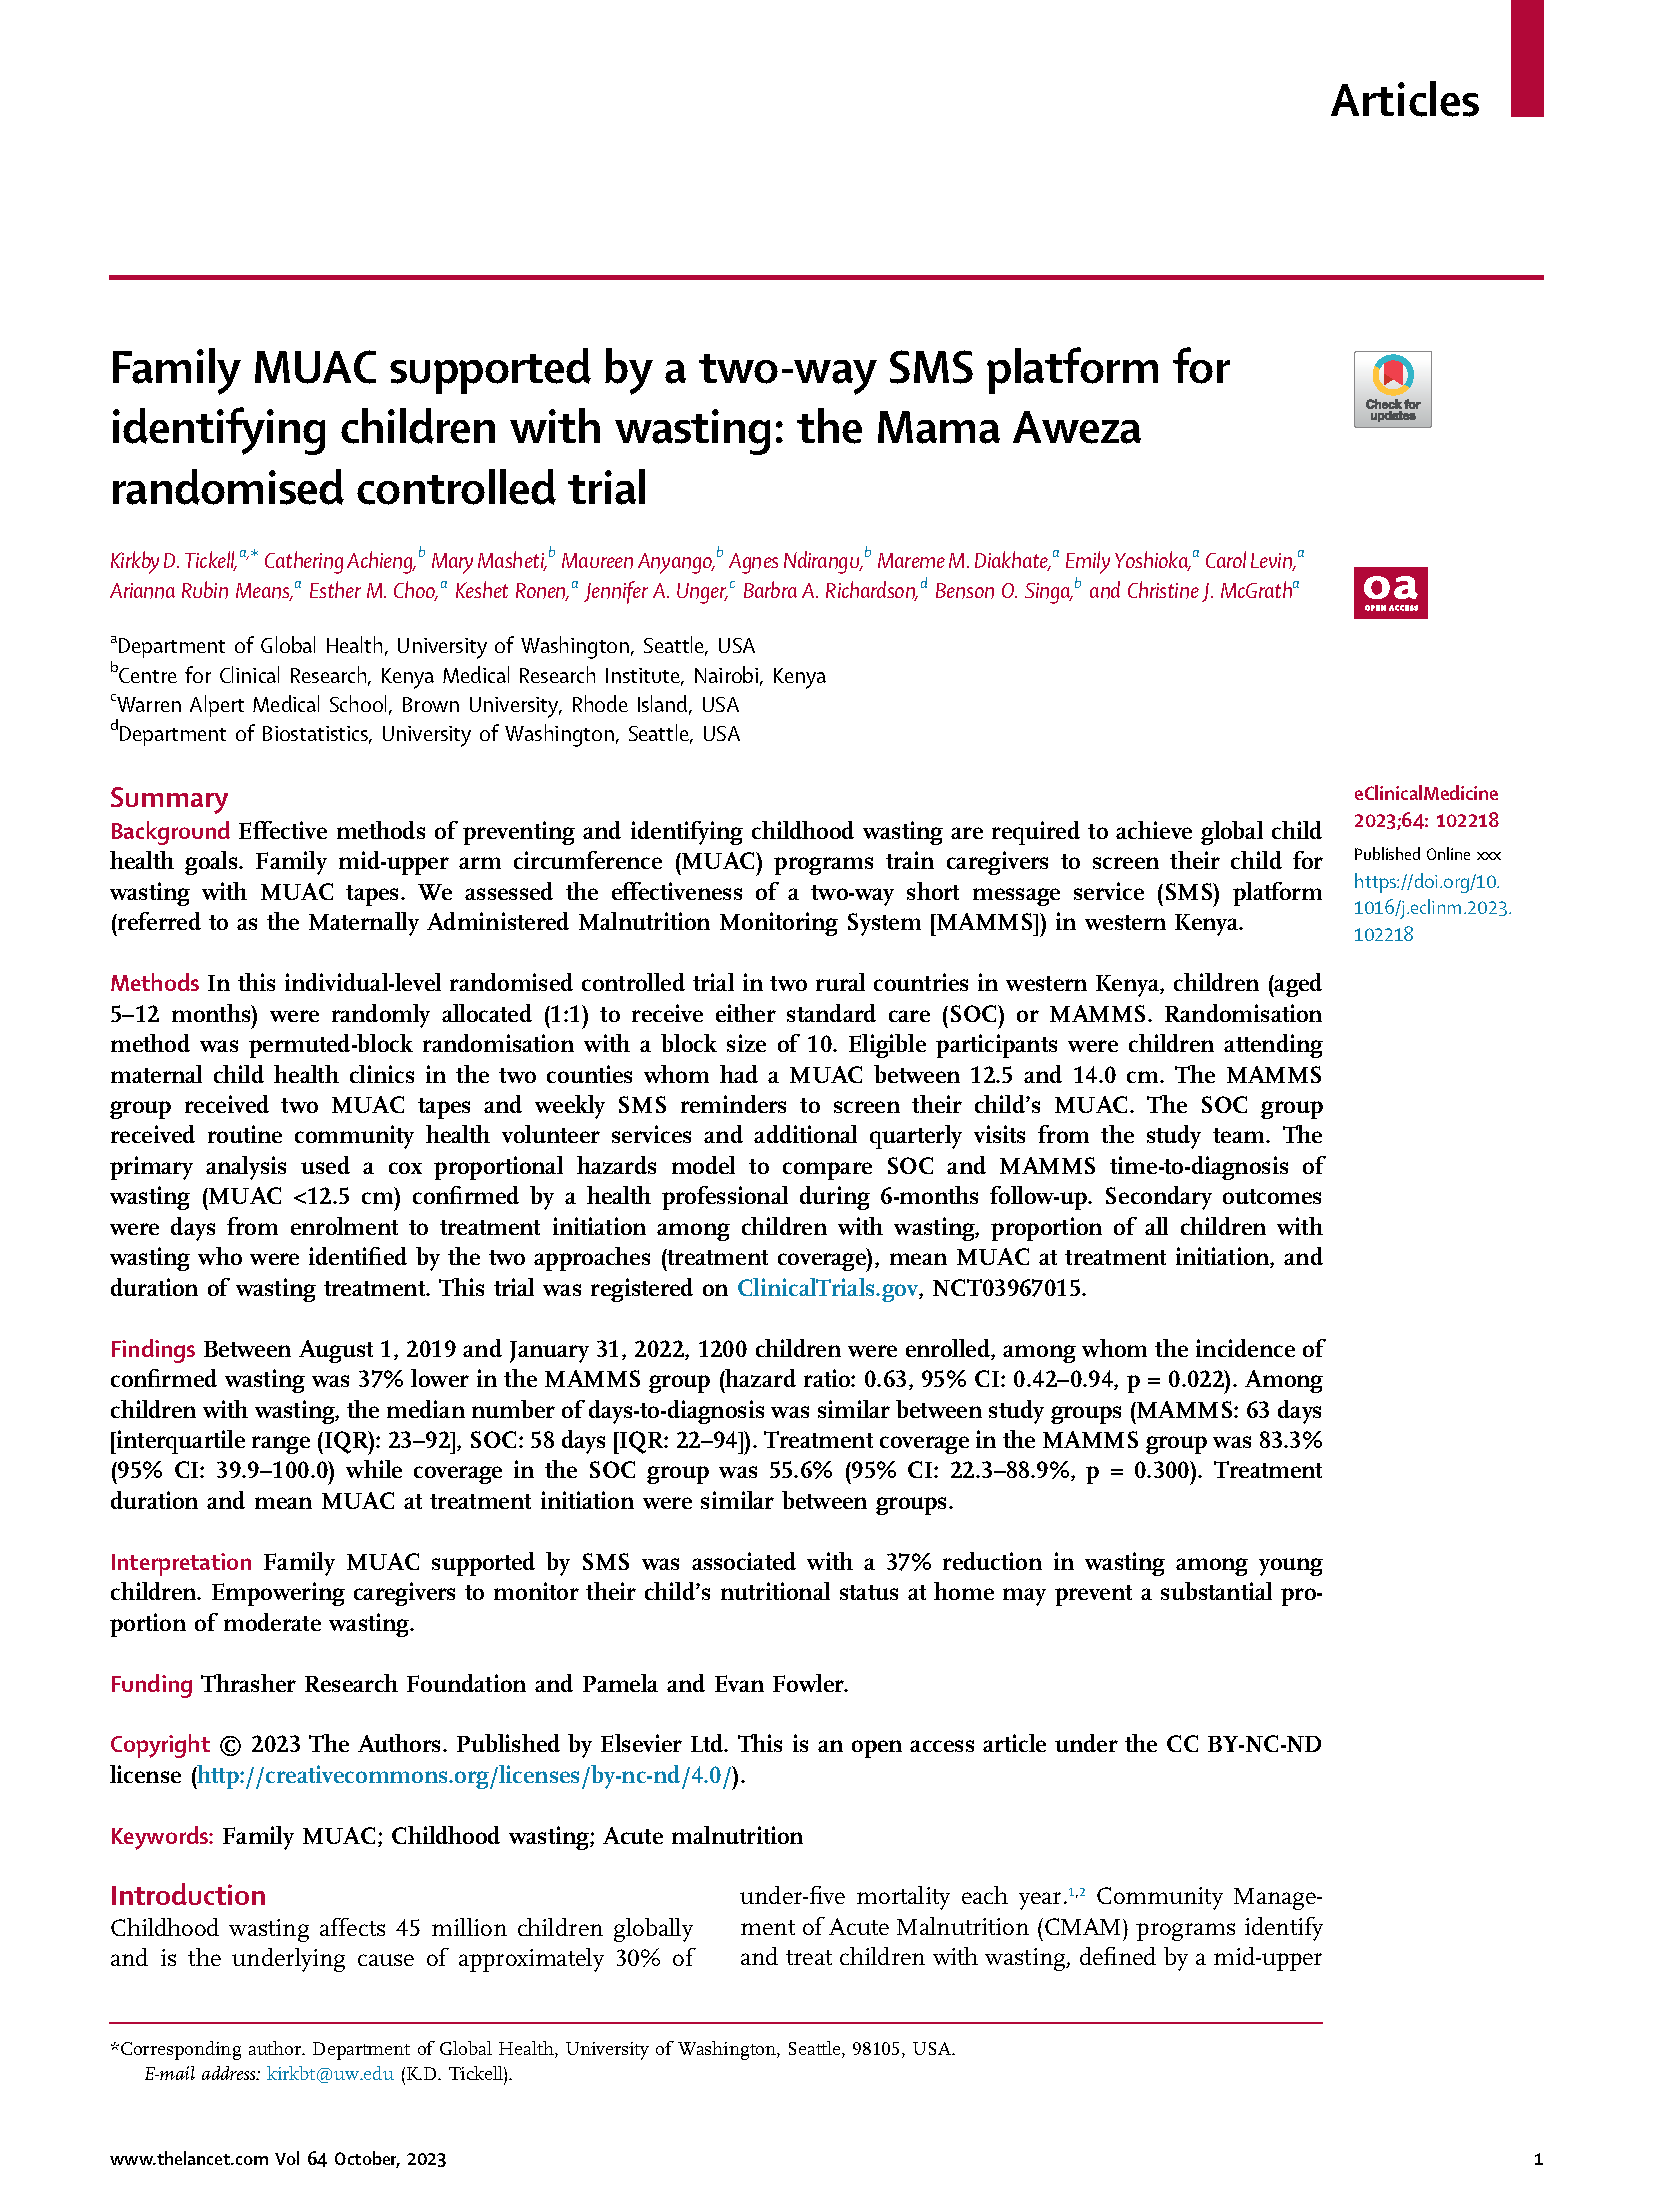 Cover page for Family MUAC Supported By a Two-Way SMS Platform for Identifying Children With Wasting: The Mama Aweza Randomized Controlled Trial